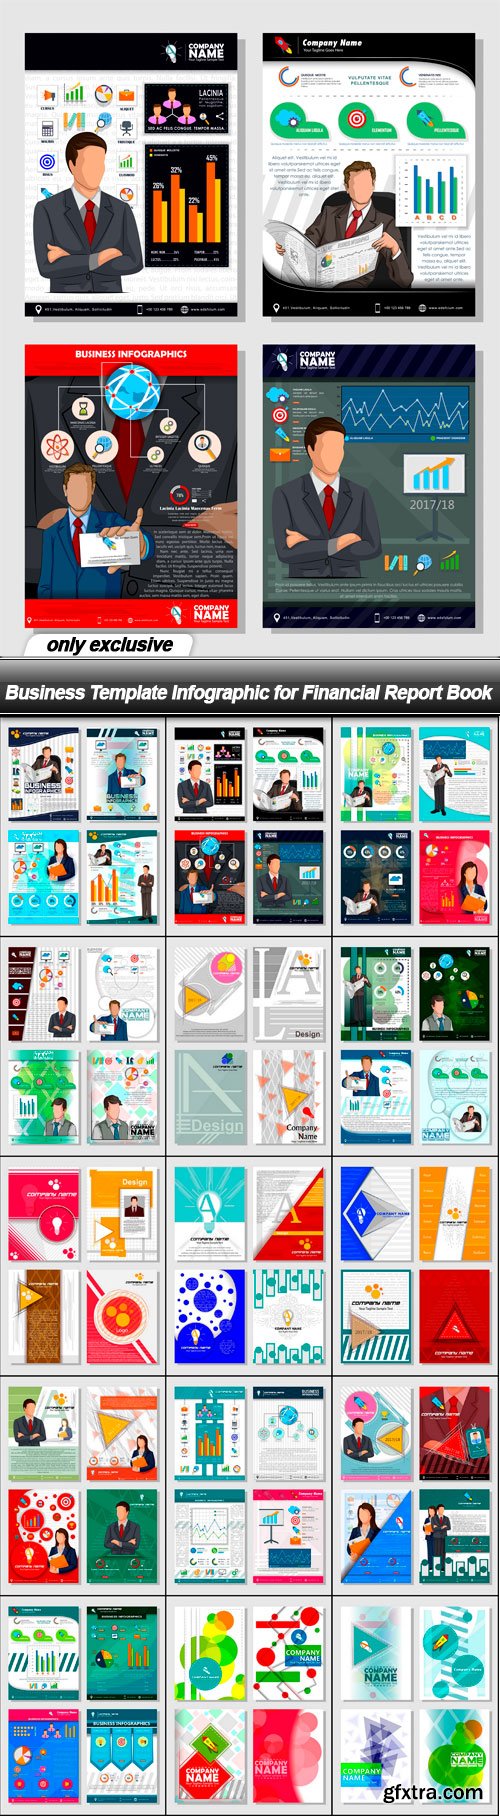 Business Template Infographic for Financial Report Book - 15 EPS